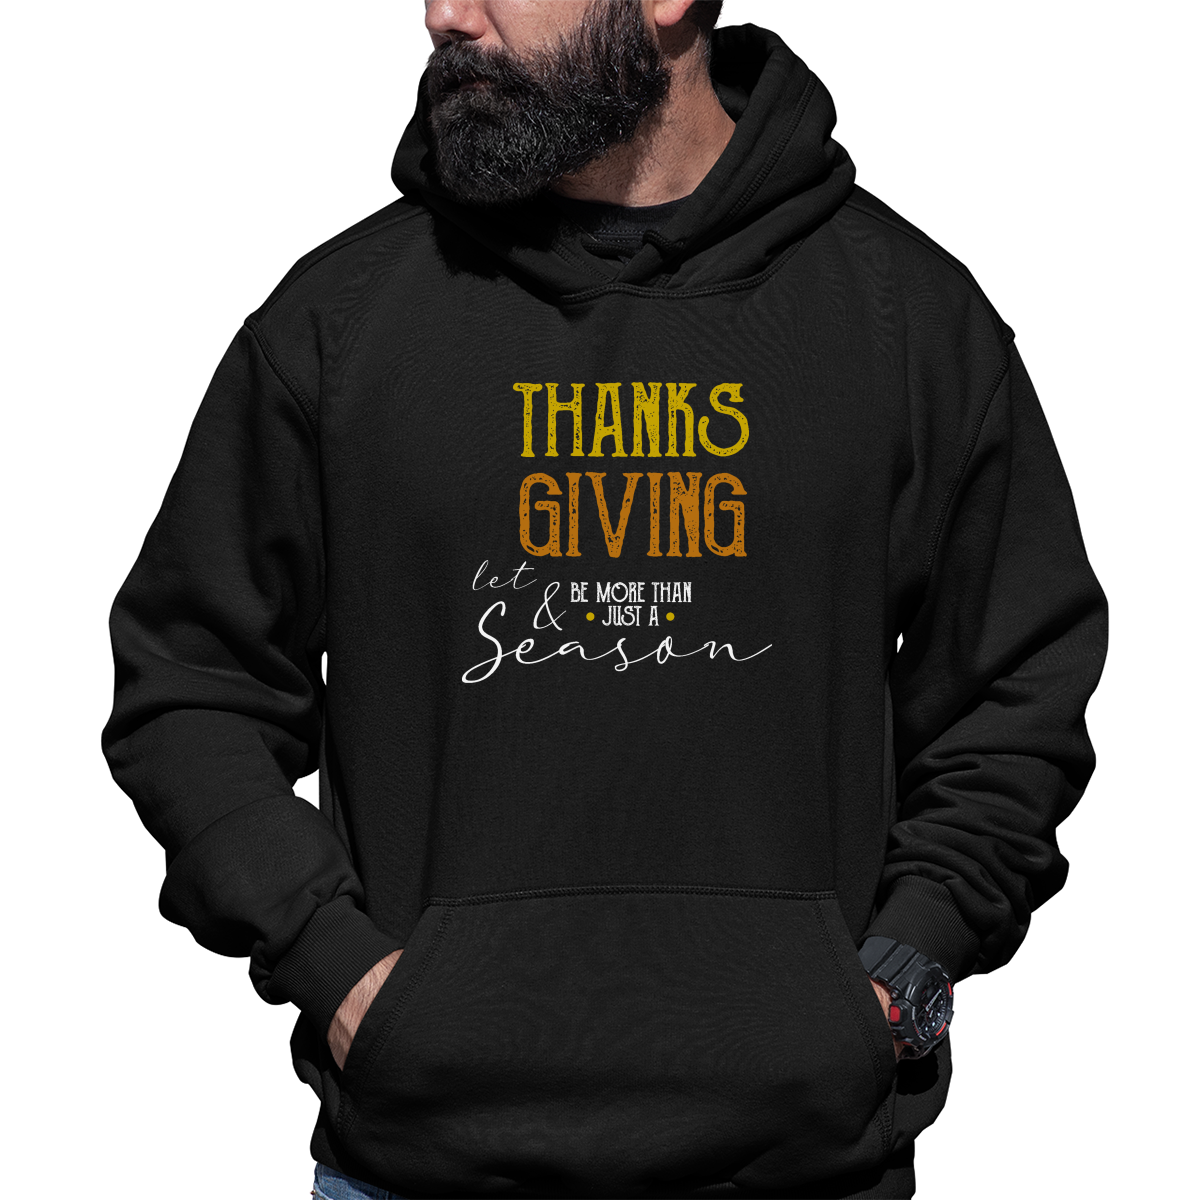 Thanks and Giving  Unisex Hoodie | Black